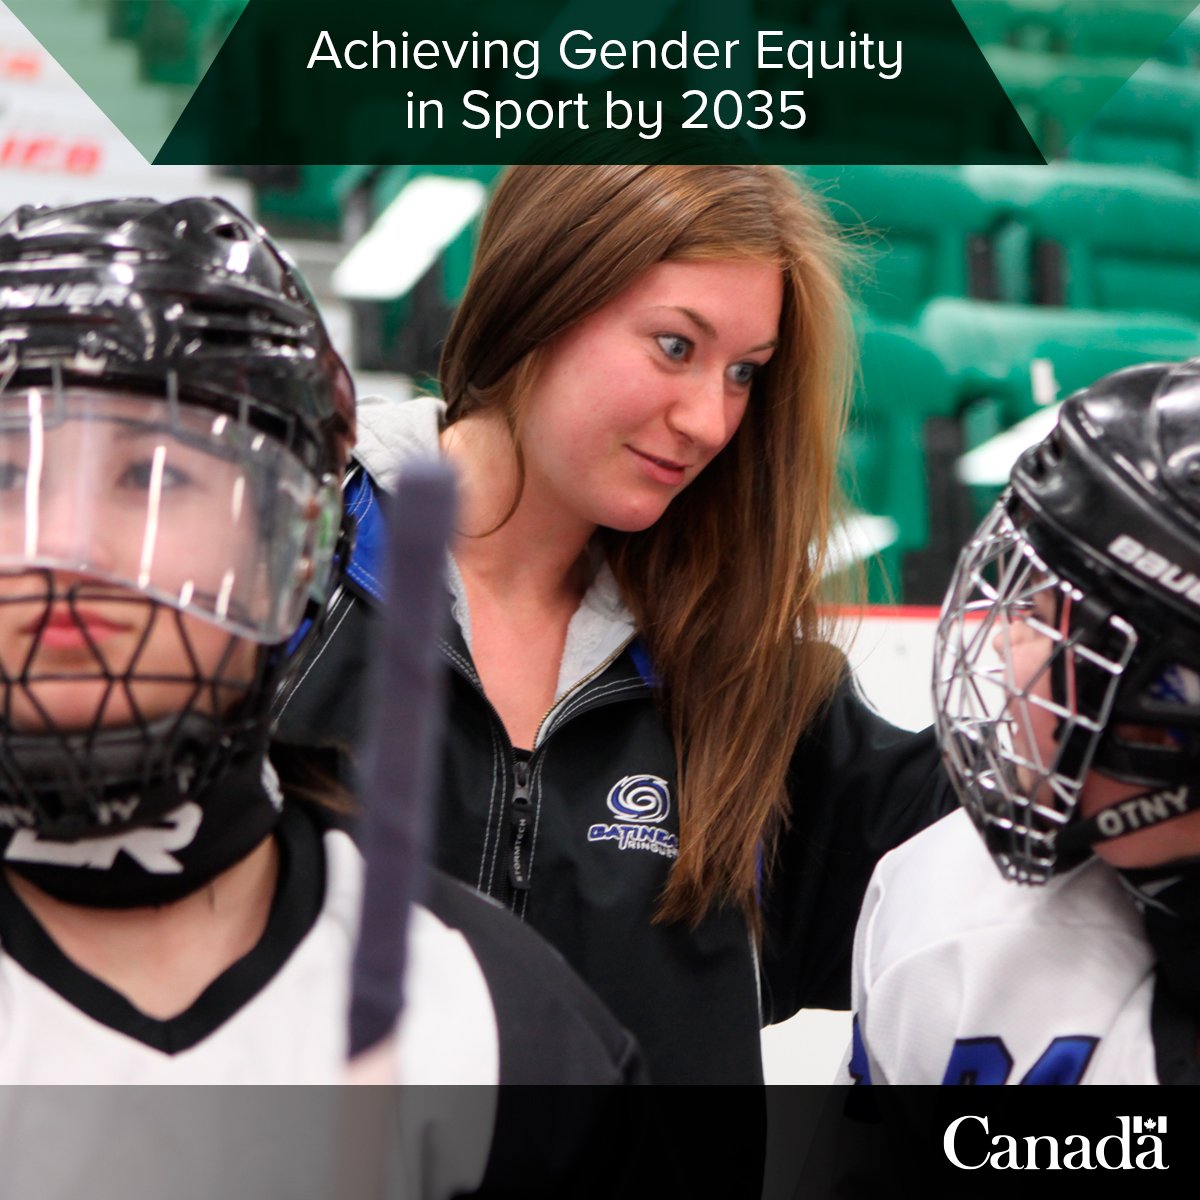 An inclusive sport system is one where girls and women are well-represented across leadership roles as coaches, referees, volunteers, administrators and board members. Tag a woman who paved the way! #EquityinSport #womeninsport @CAAWS @Women_Canada
📷@ringettecanada